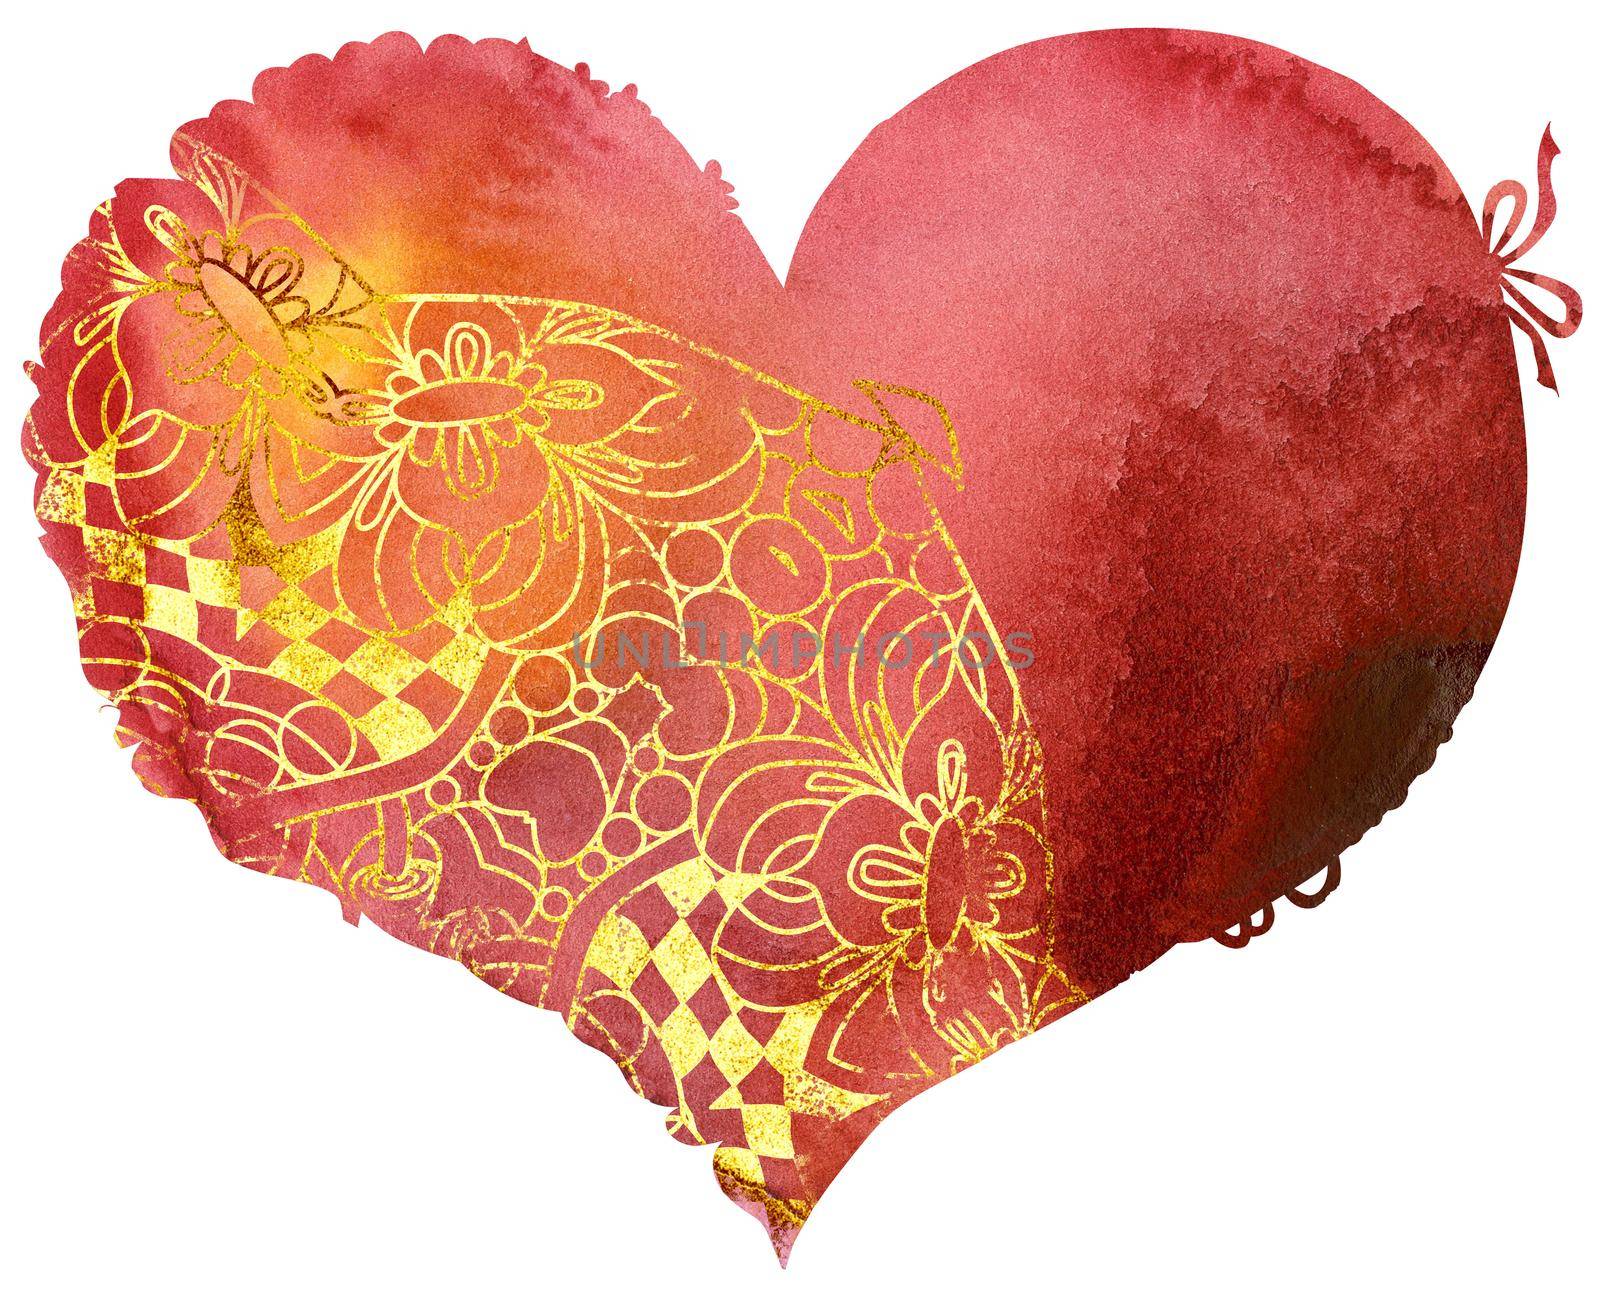 watercolor red heart with a lace edge with gold pattern by NataOmsk